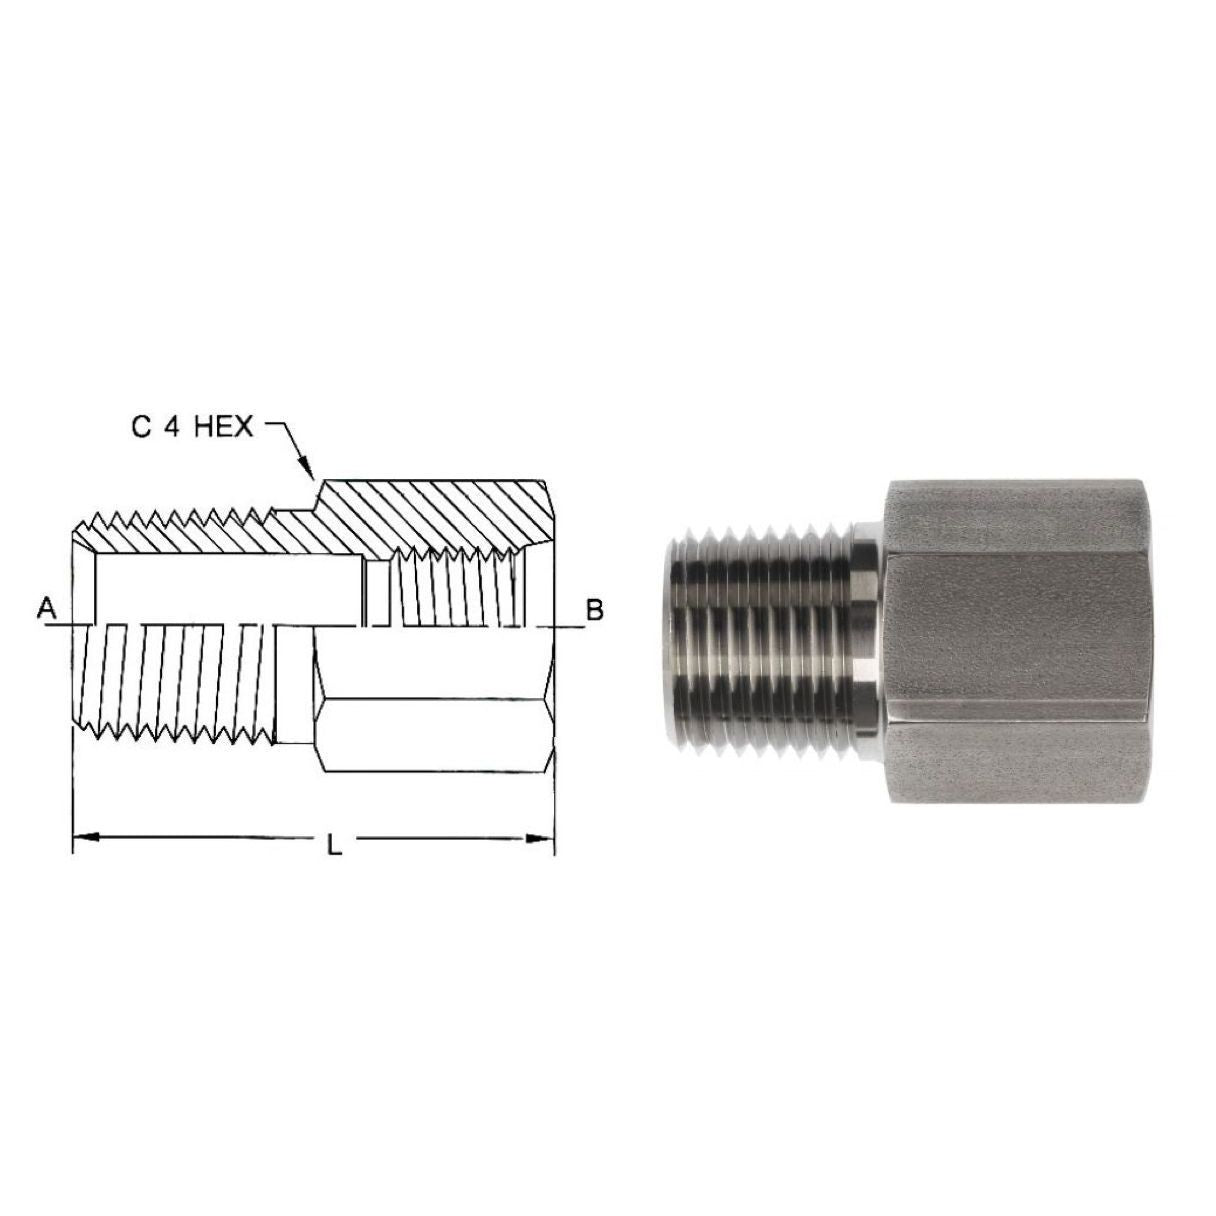 6404-04-06 : OneHydraulics Adapter, Straight, 0.25 (1/4") Female ORB x 0.375 (3/8") Male, Steel, 6000psi